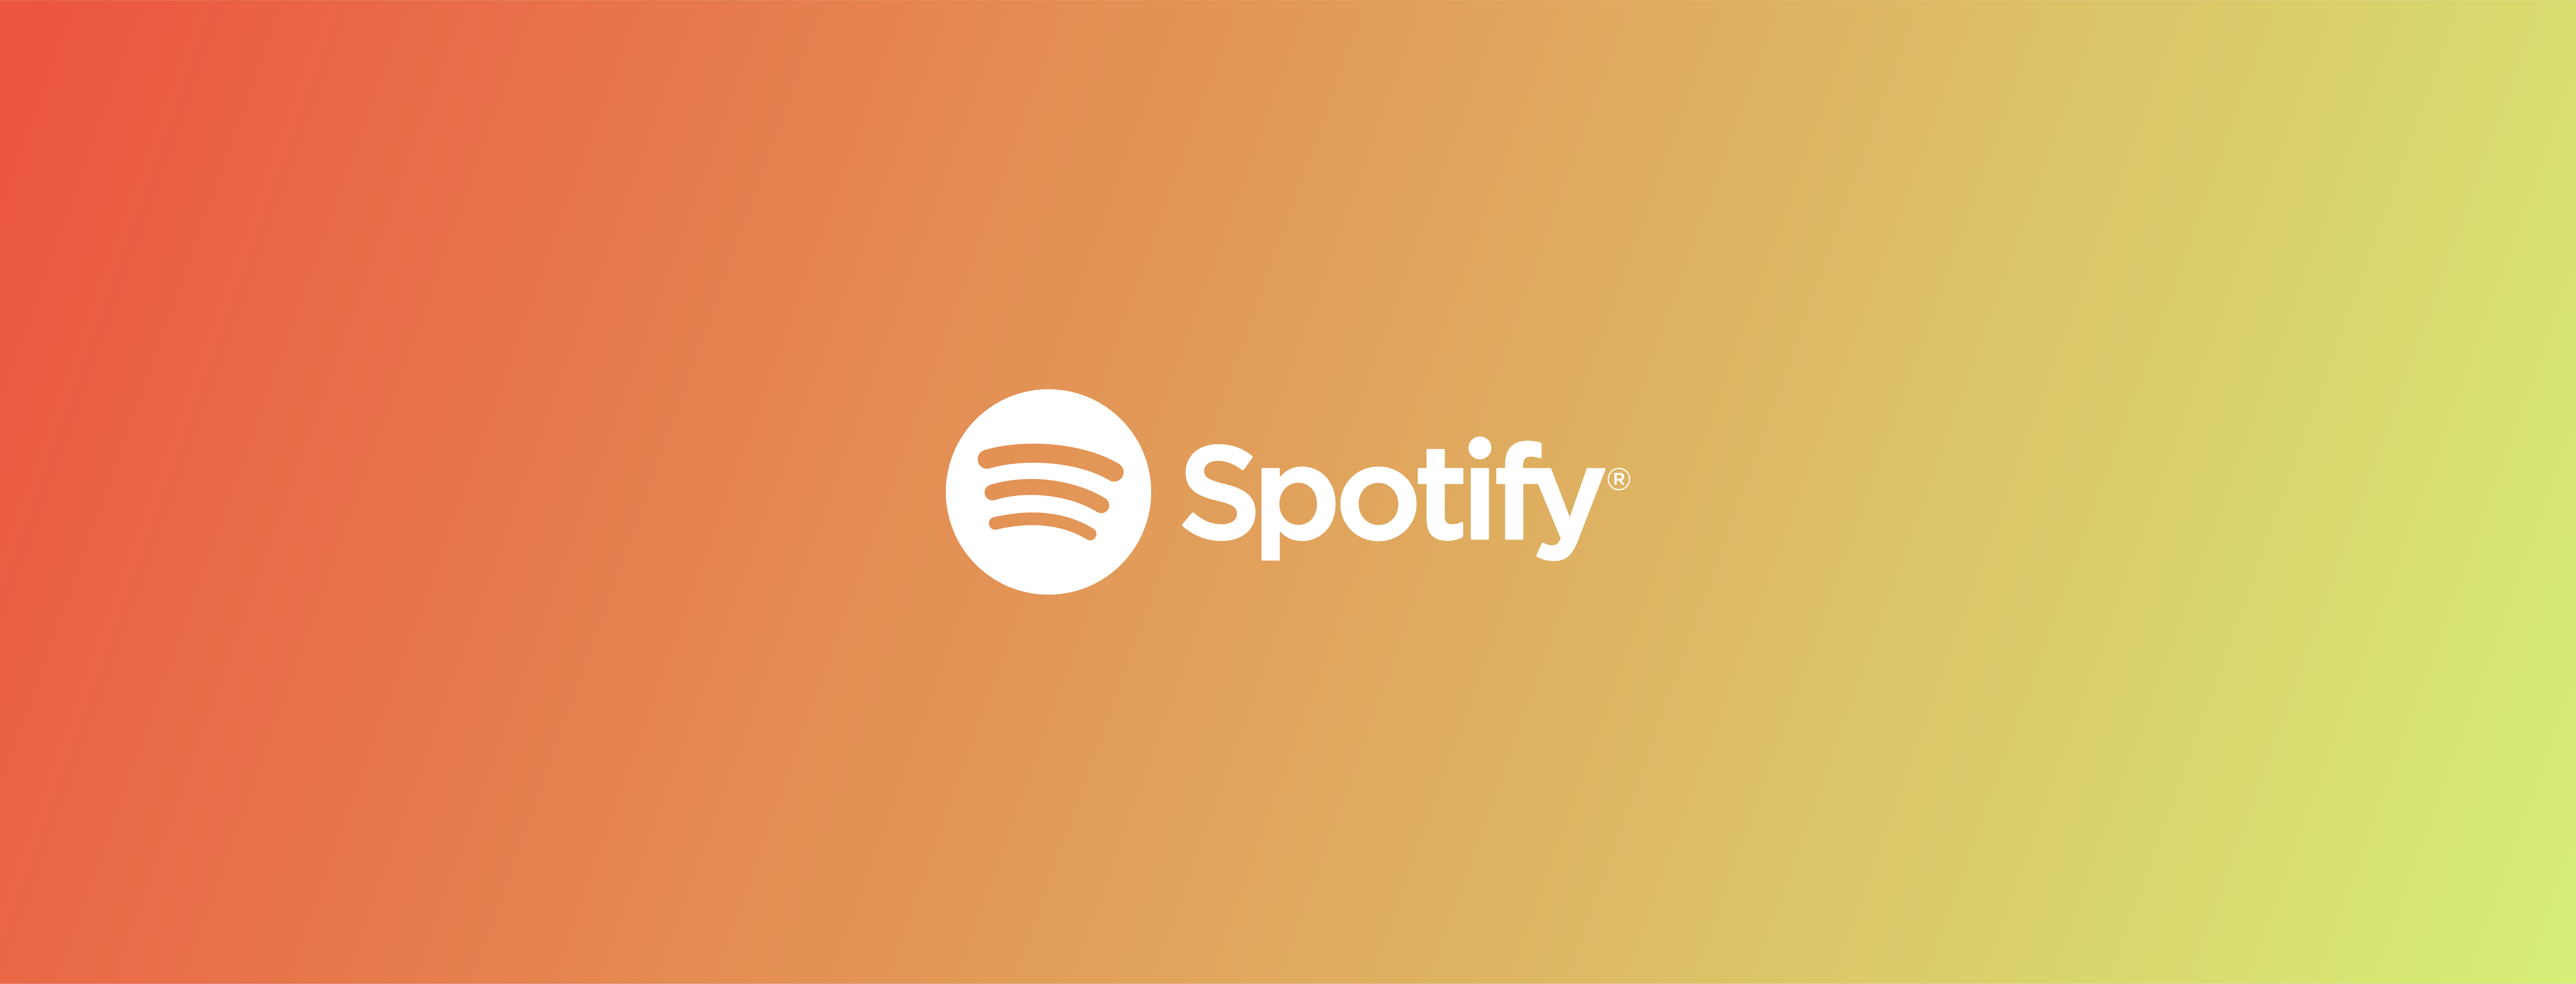 Vodafone free spotify streaming download